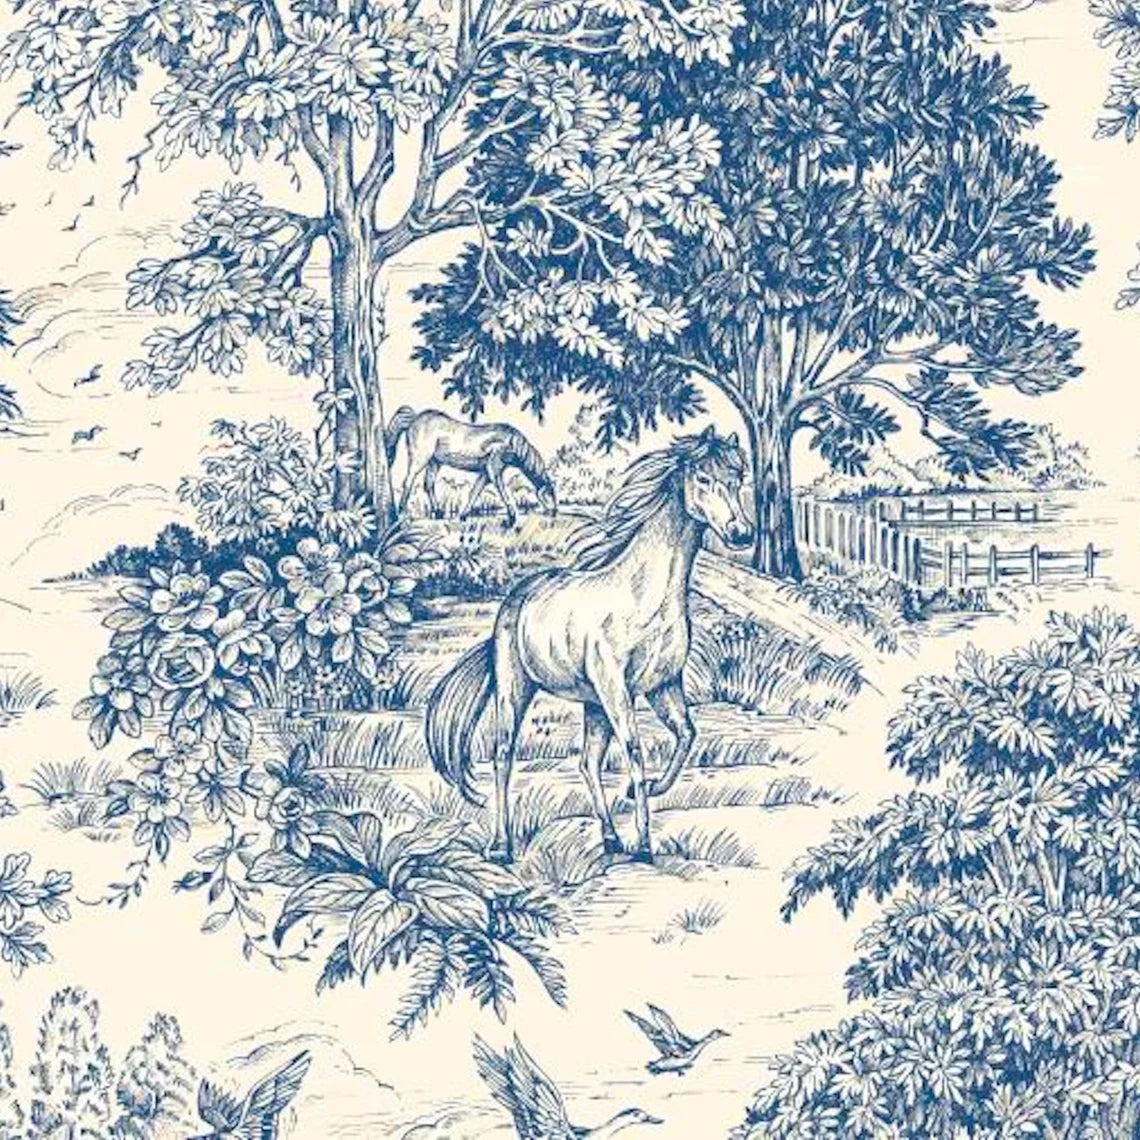 tie-up valance in Yellowstone Bluebell Blue Country Toile- Horses, Deer, Dogs- Large Scale